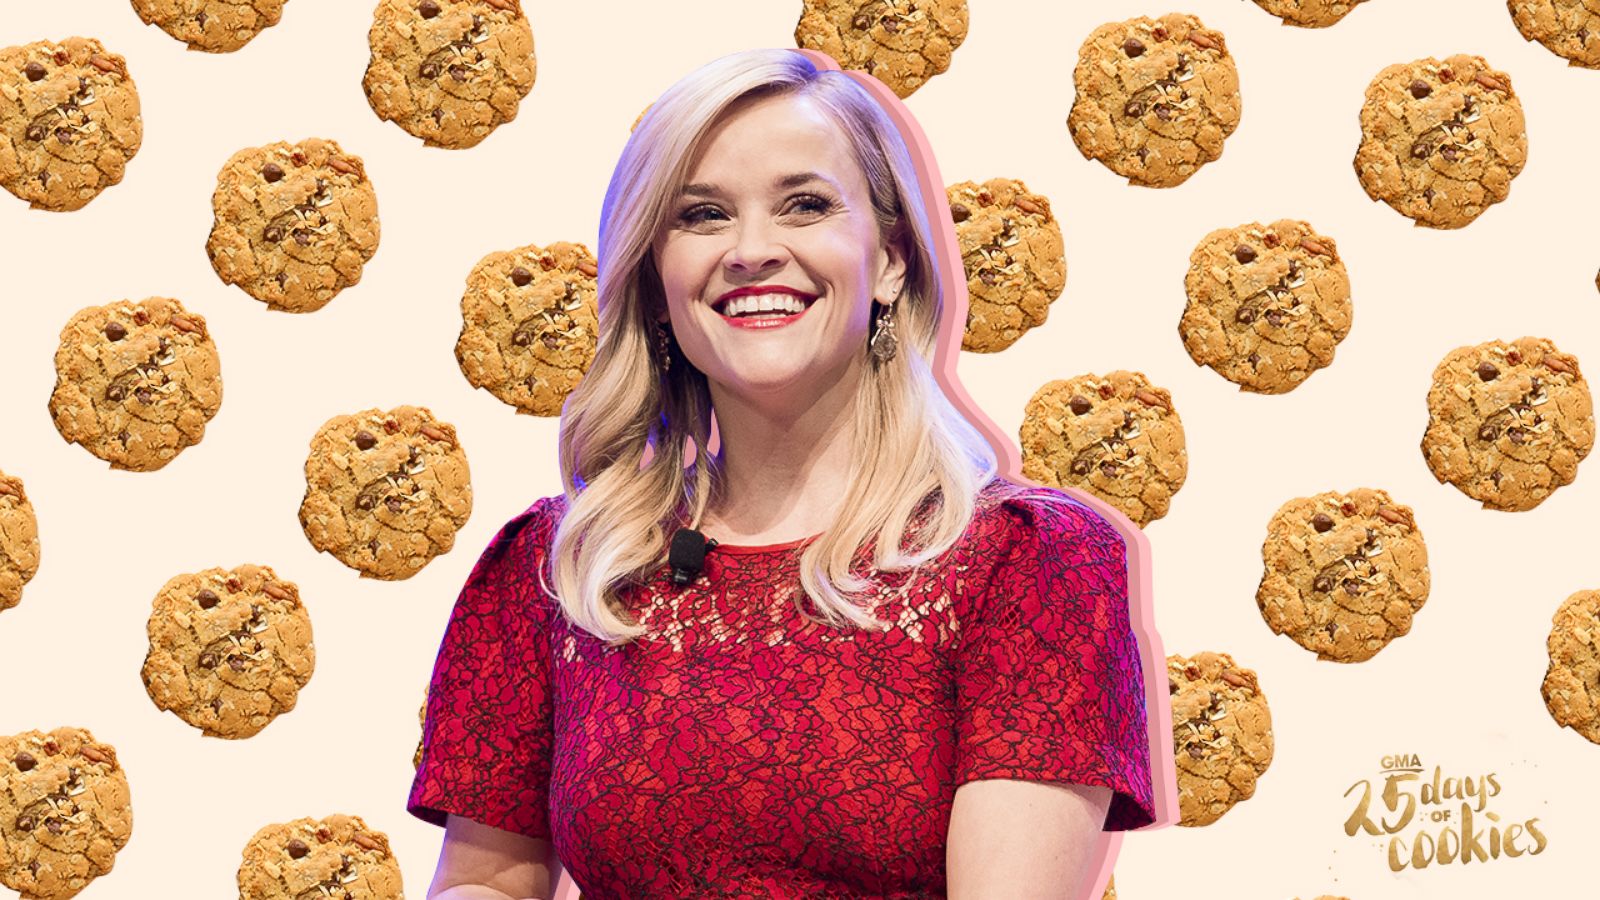 25 Days of Cookies: Reese Witherspoon's 'Cowboy Cookies' recipe - Good  Morning America